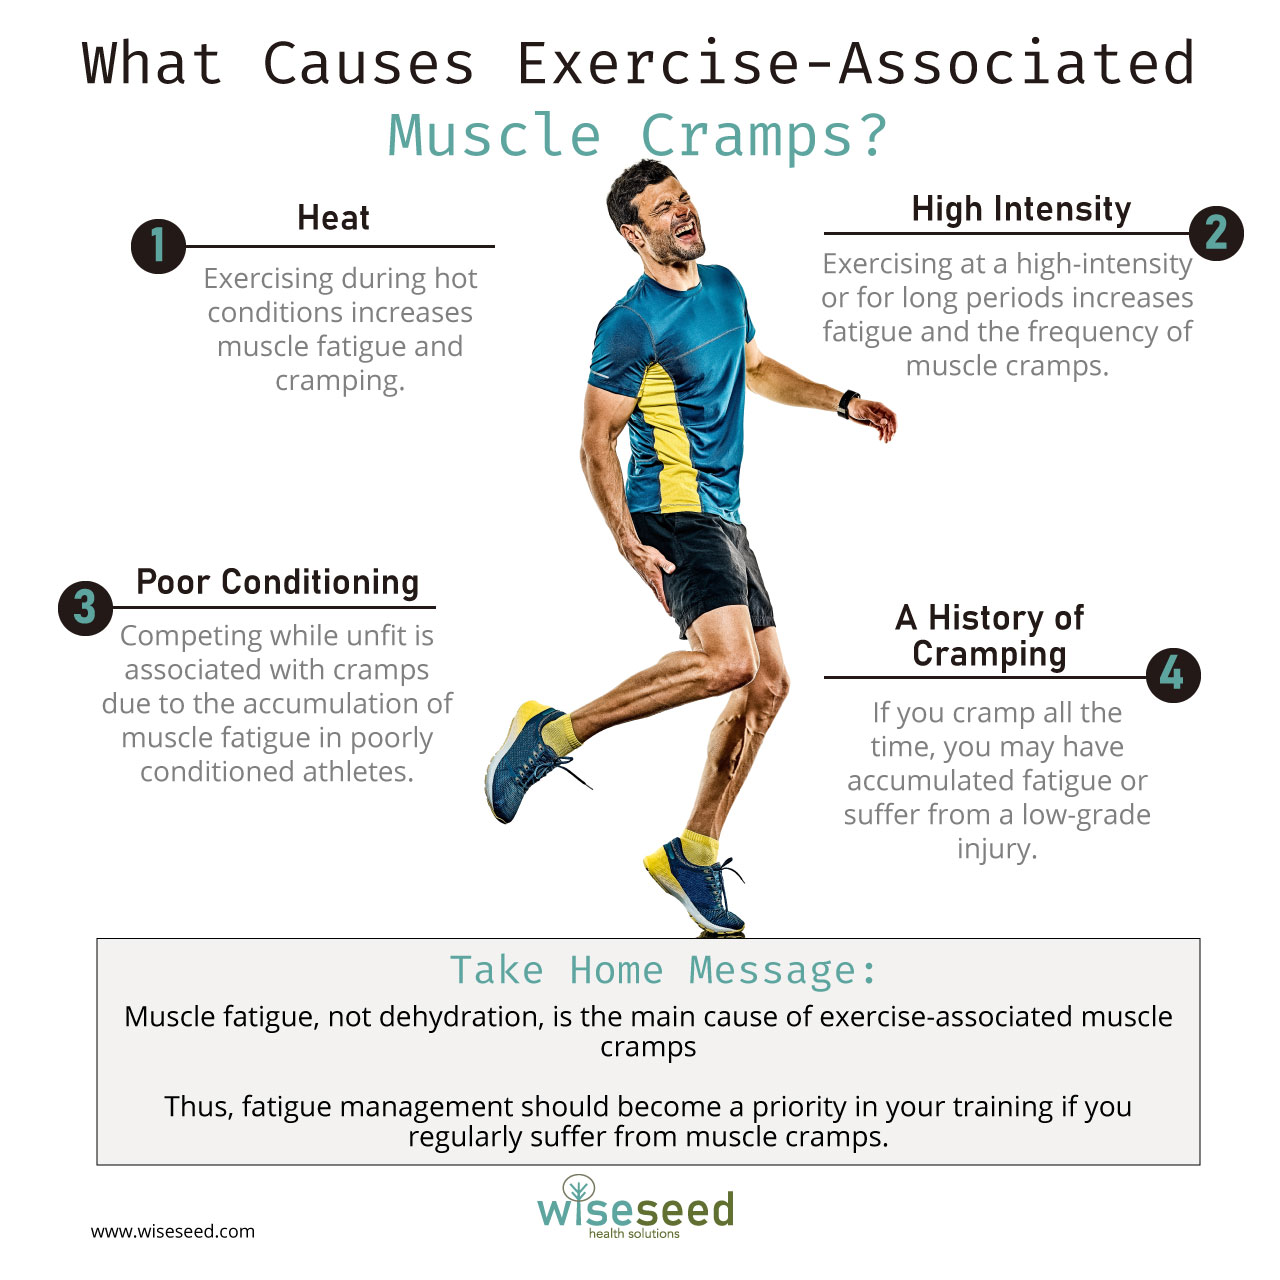 If you regularly suffer from muscle cramps, fatigue management should become a top priority in your training and competition preparation.